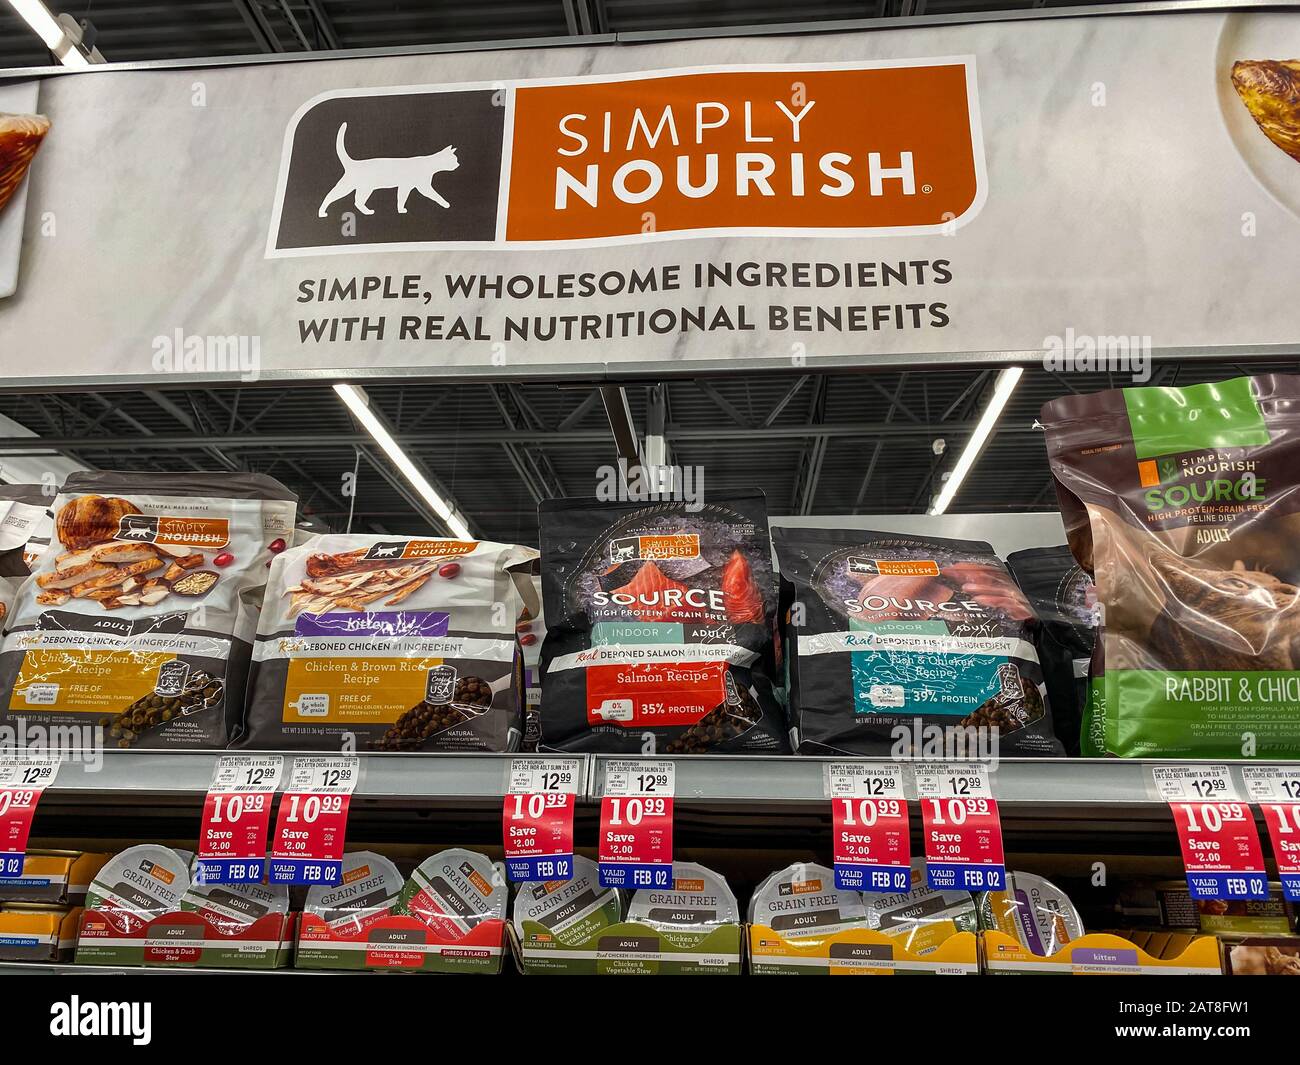 Orlando, FL/USA-1/29/20: A display of Simply Nourish Cat Food at a Petsmart Superstore ready for pet owners to purchase for their pets. Stock Photo